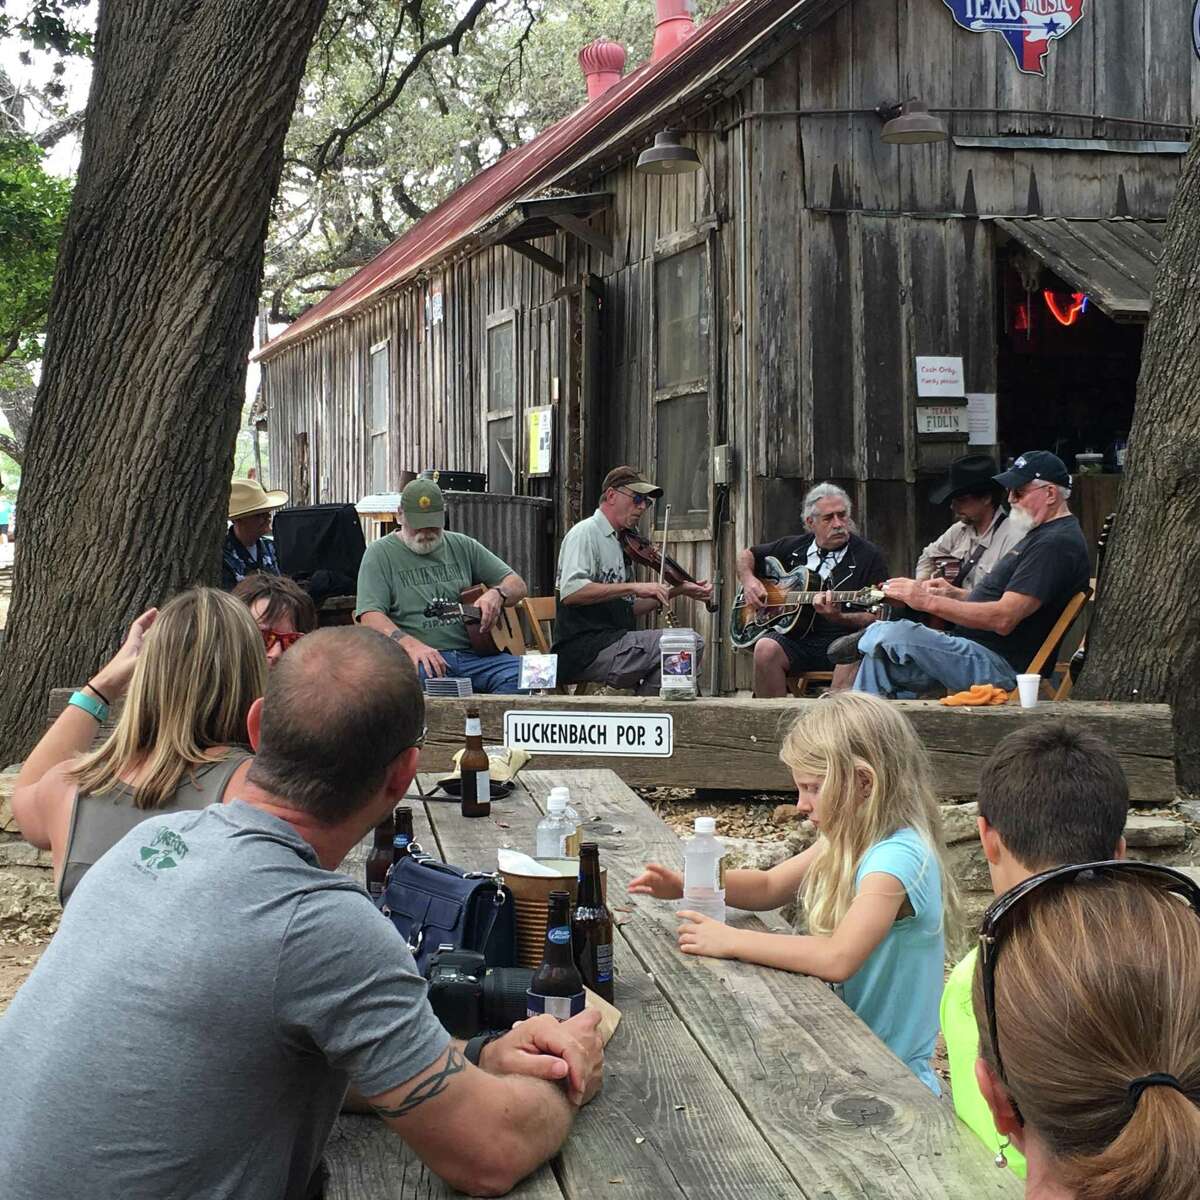 The unincorporated Hill Country town of Luckenbach, immortalized by Waylon Jennings’ classic, “Luckenbach, Texas (Back to the Basics of Love)” is still a music mecca, with a full calendar of performances. For a buck-sixty, you can also buy a Luckenbach decal to humblebrag about being there.